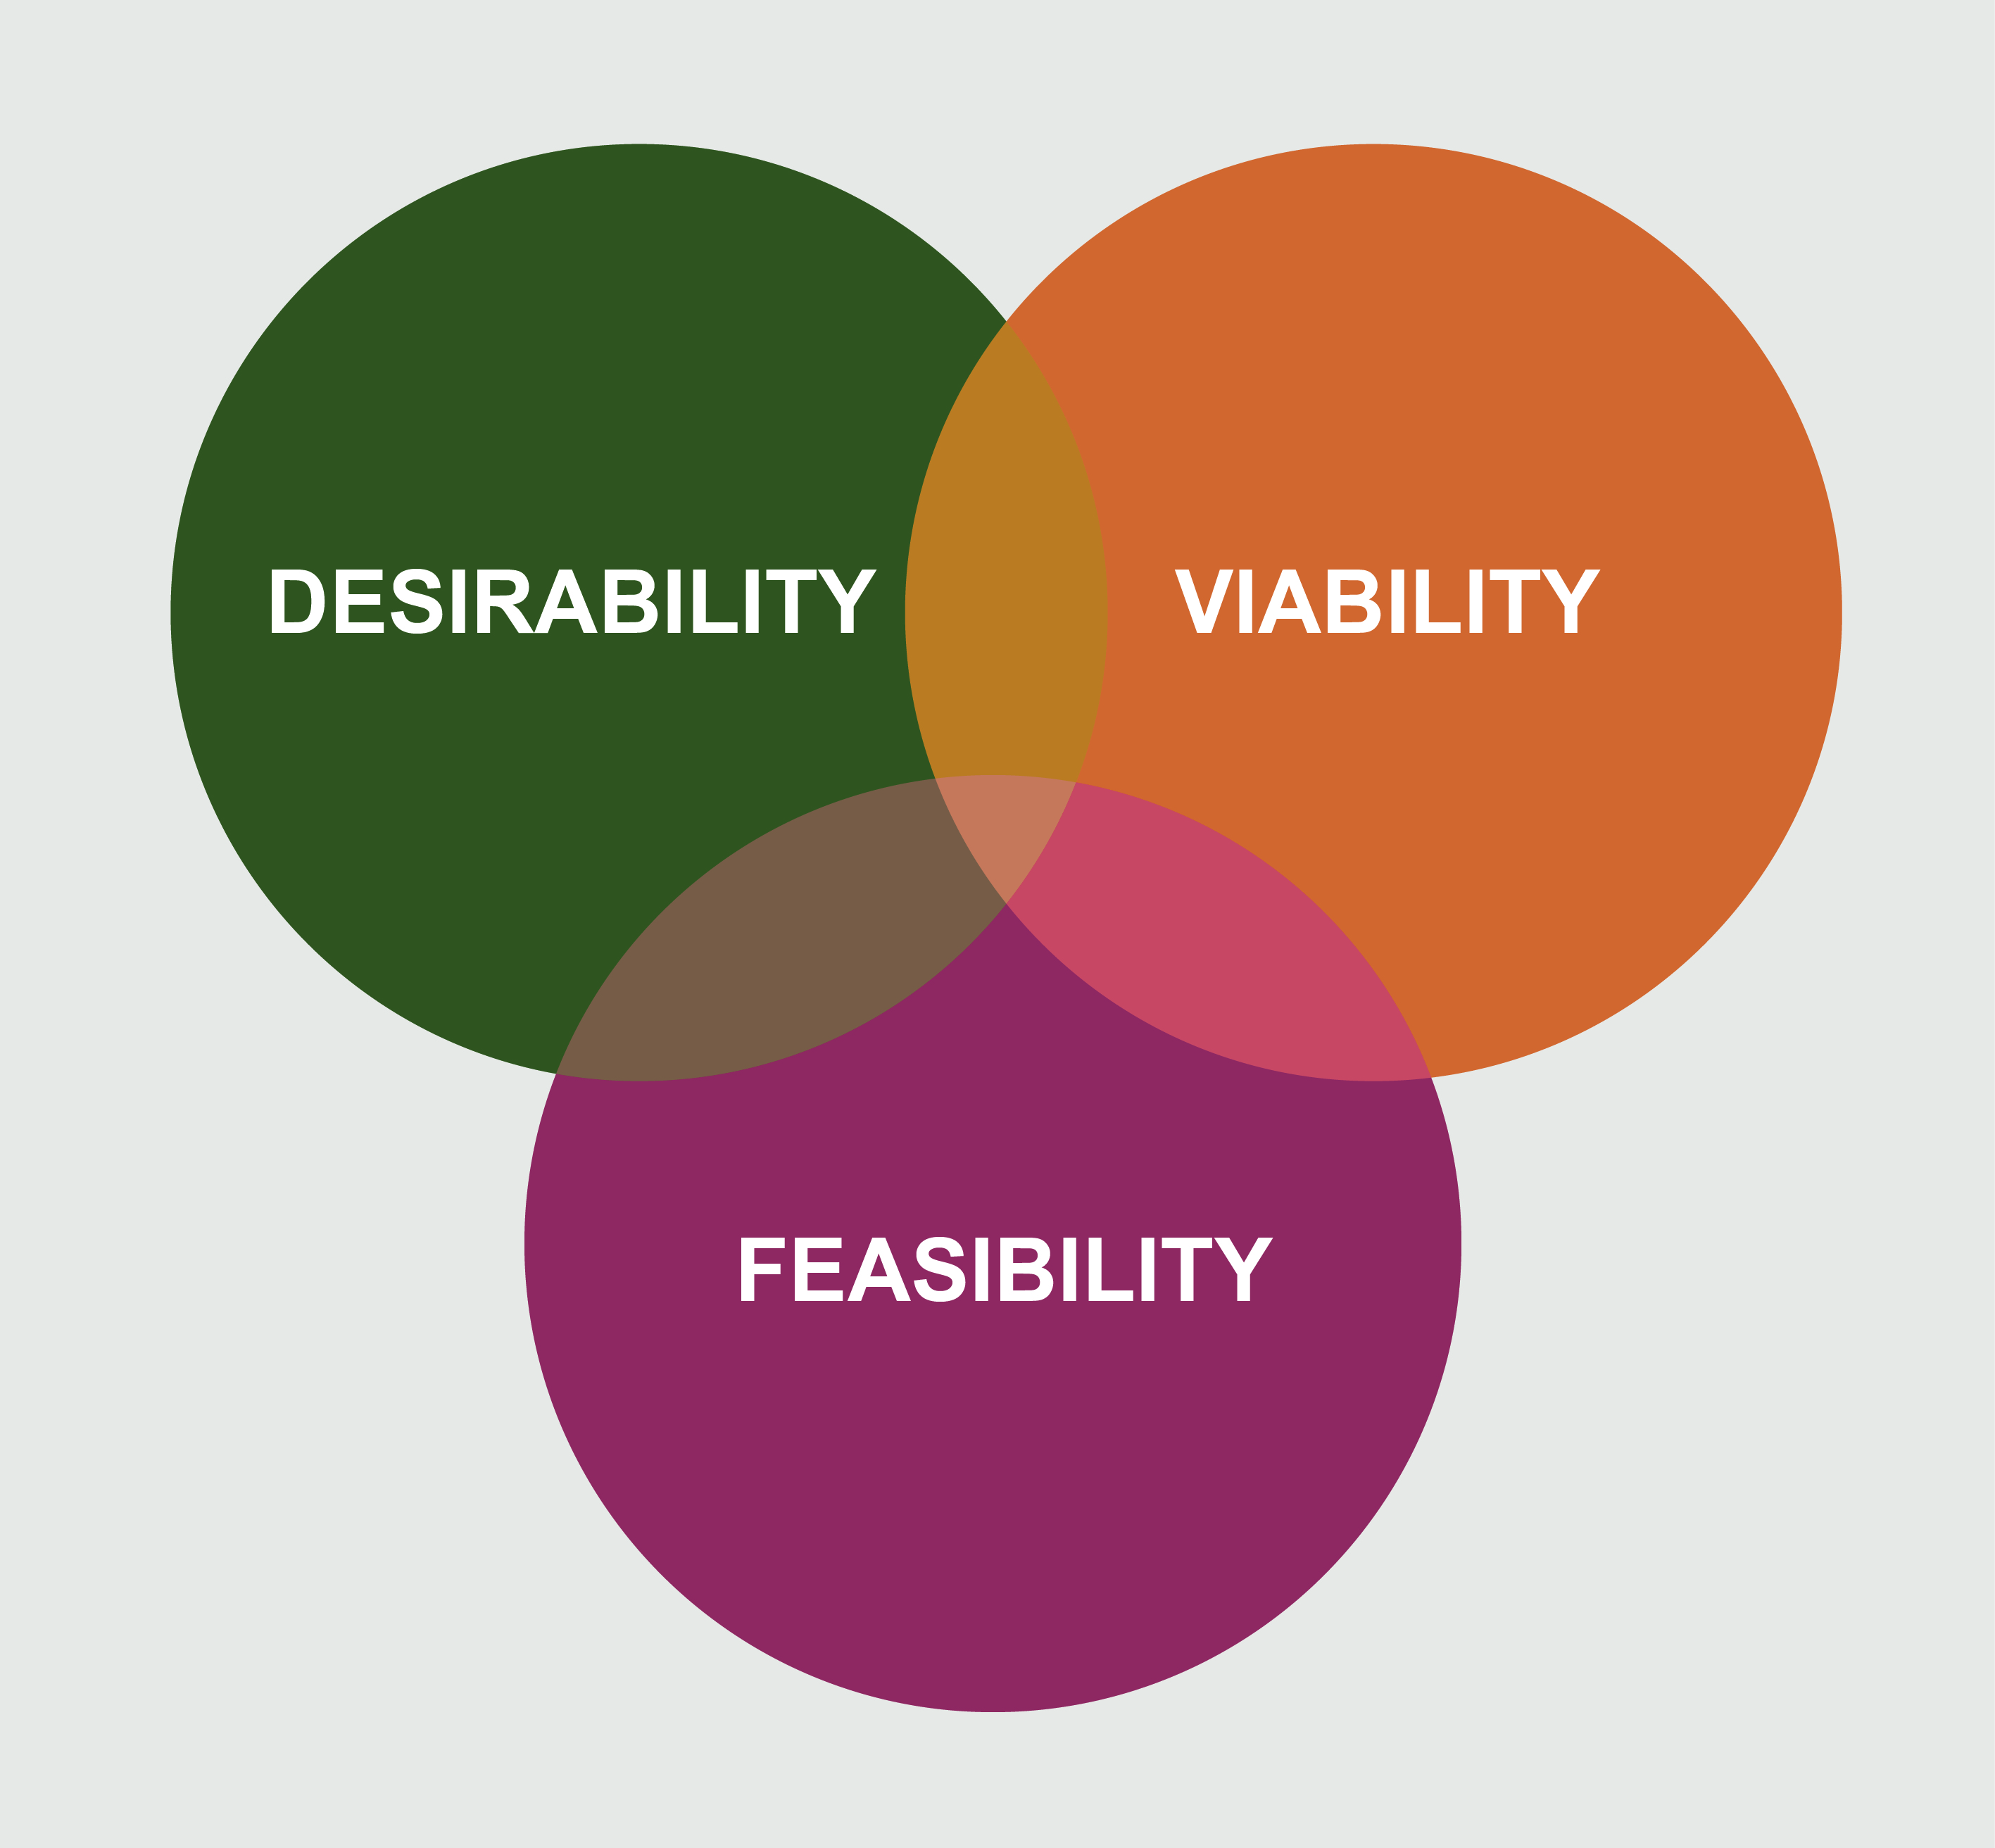 Venn diagram rubric of three criteria often used for judging competitions: Desirability, Viability and Feasibility. Graphic shows 3 intersecting circles. Each circle contains one of the following words: "Desirability," "Viability," "Feasibility."